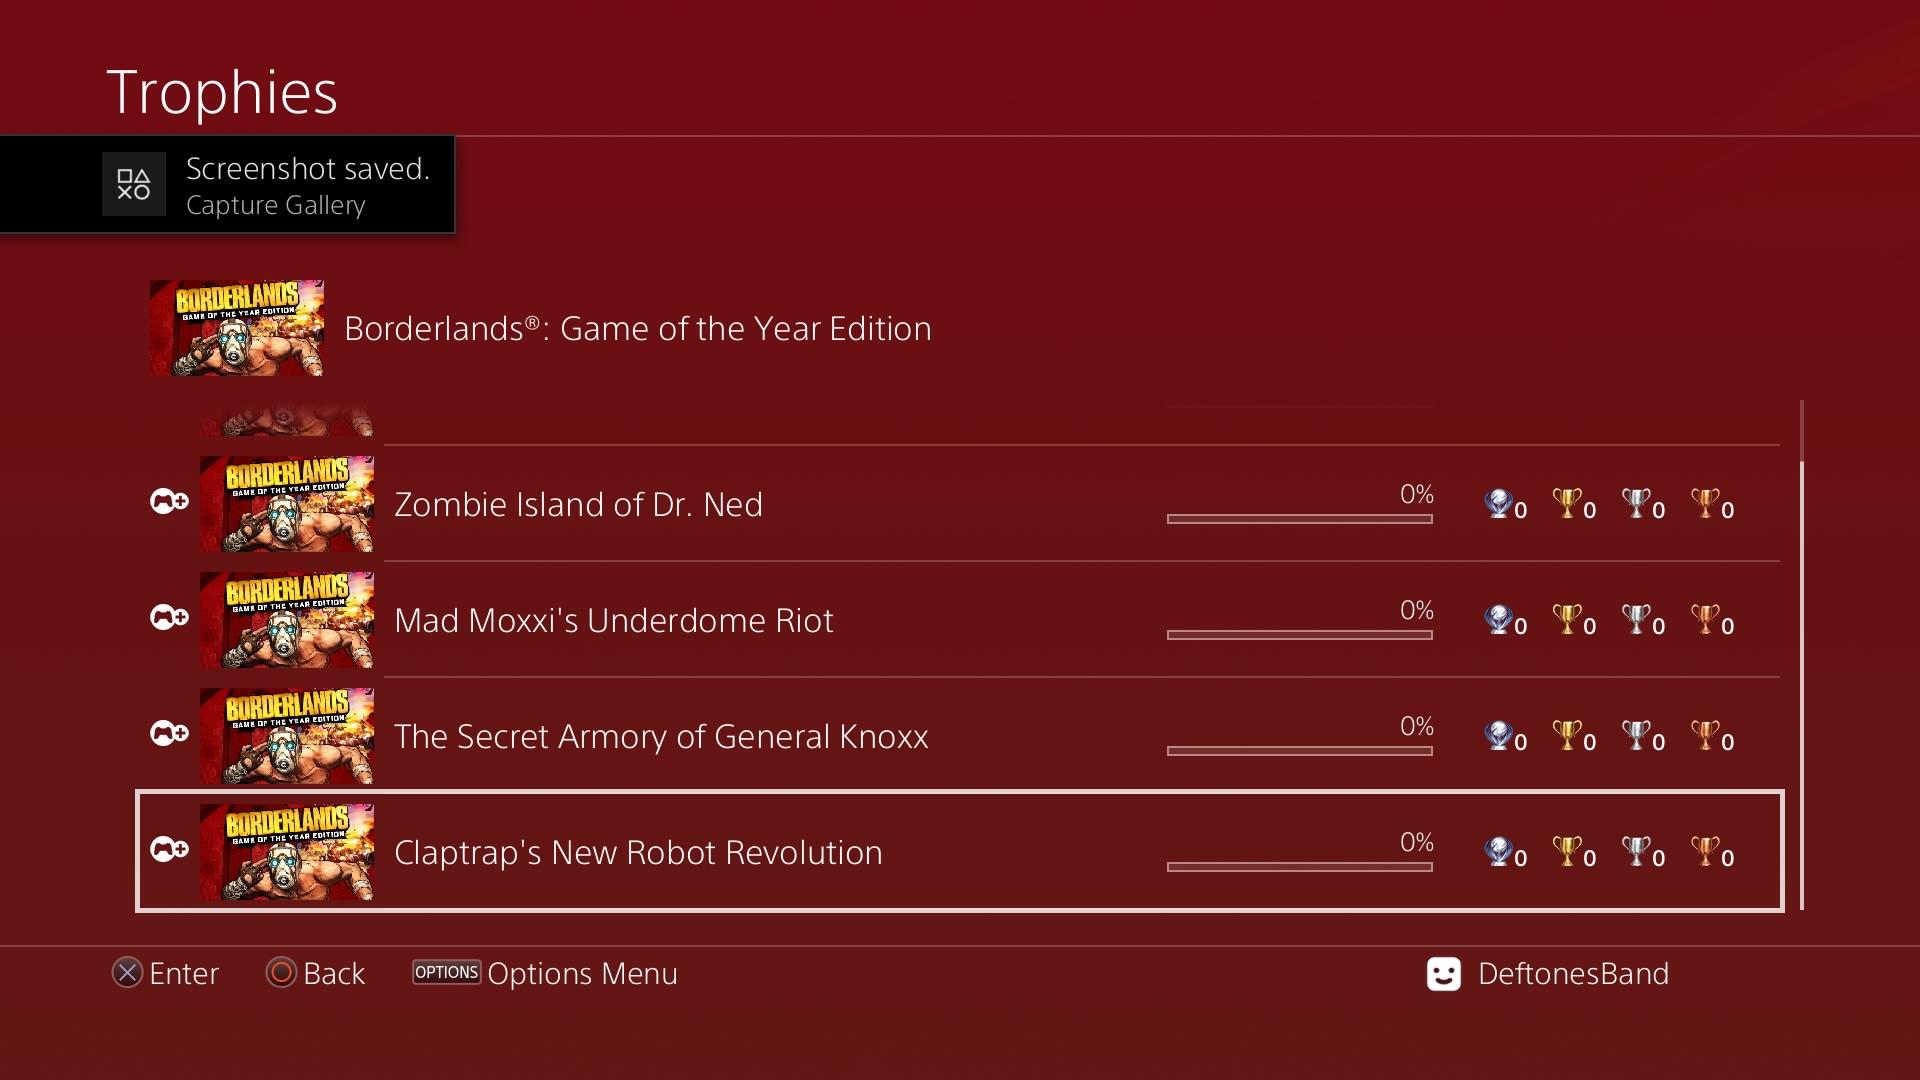 Borderlands PS4: Game of the Year Edition Trophies